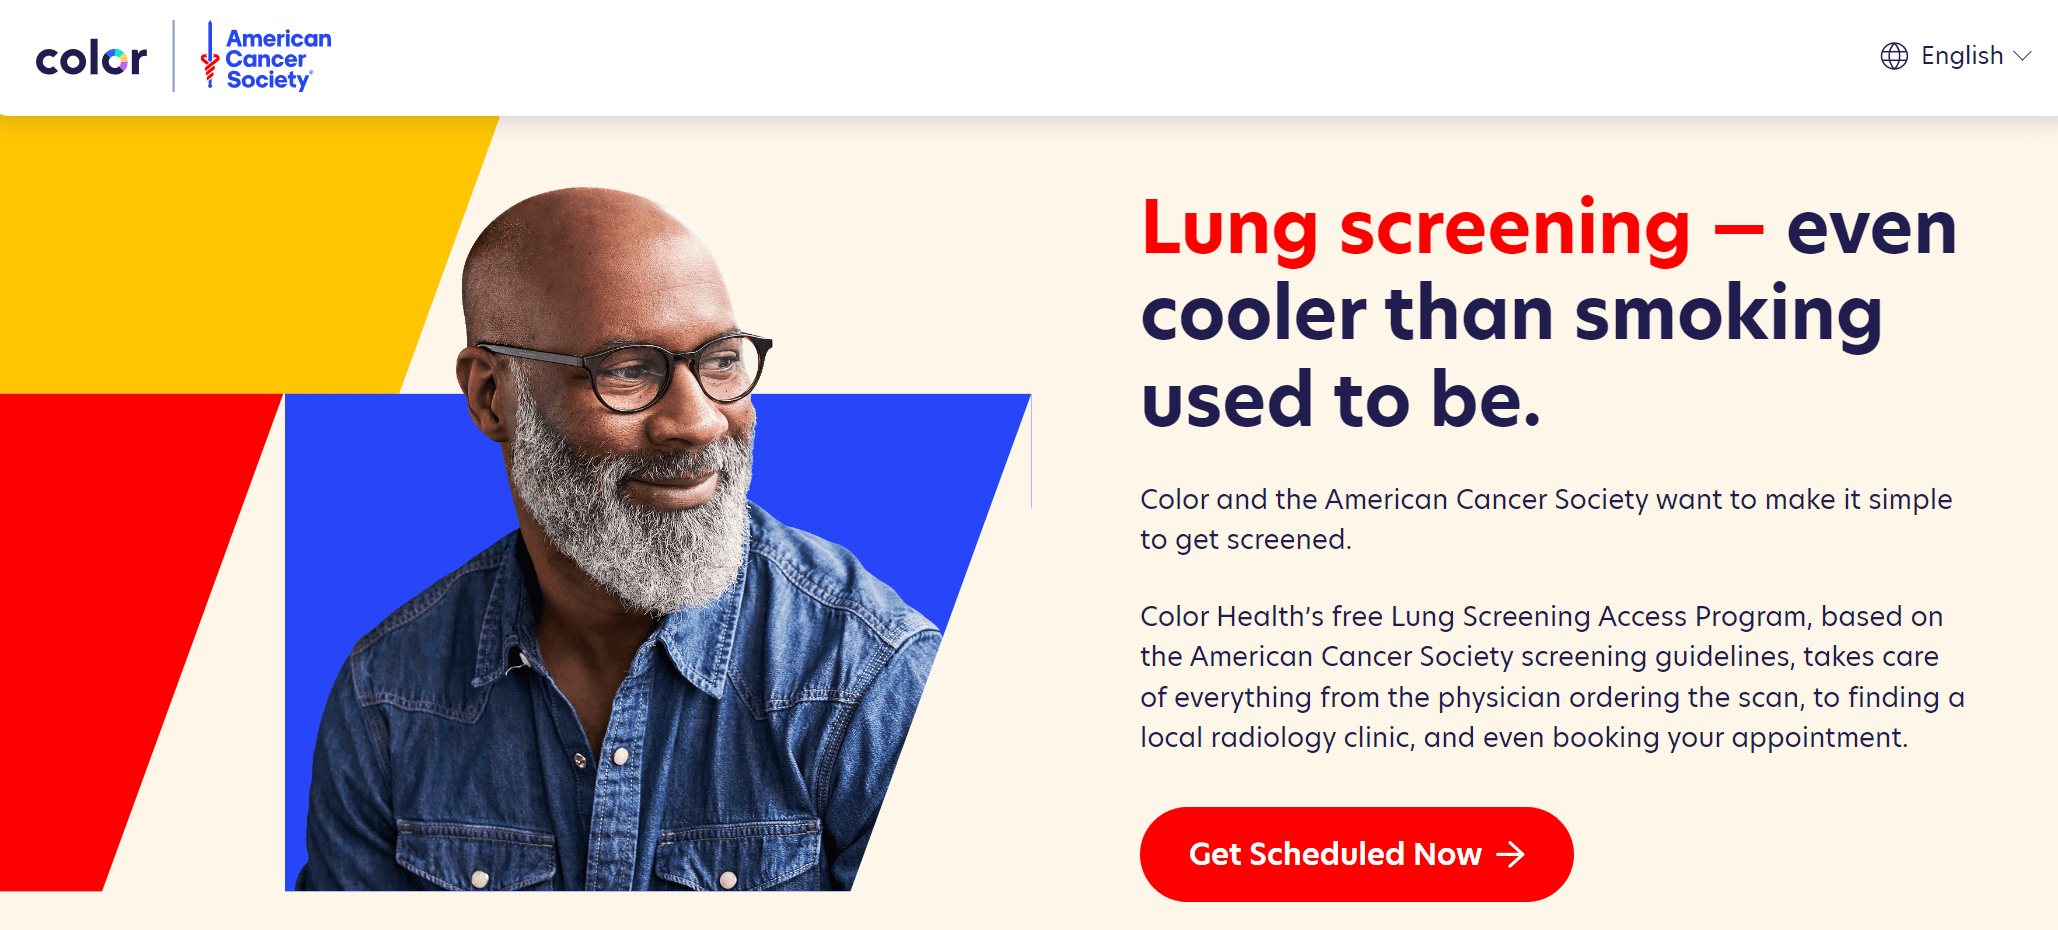 American Cancer Society and Color Health Partner to Provide Free Lung Cancer Screening